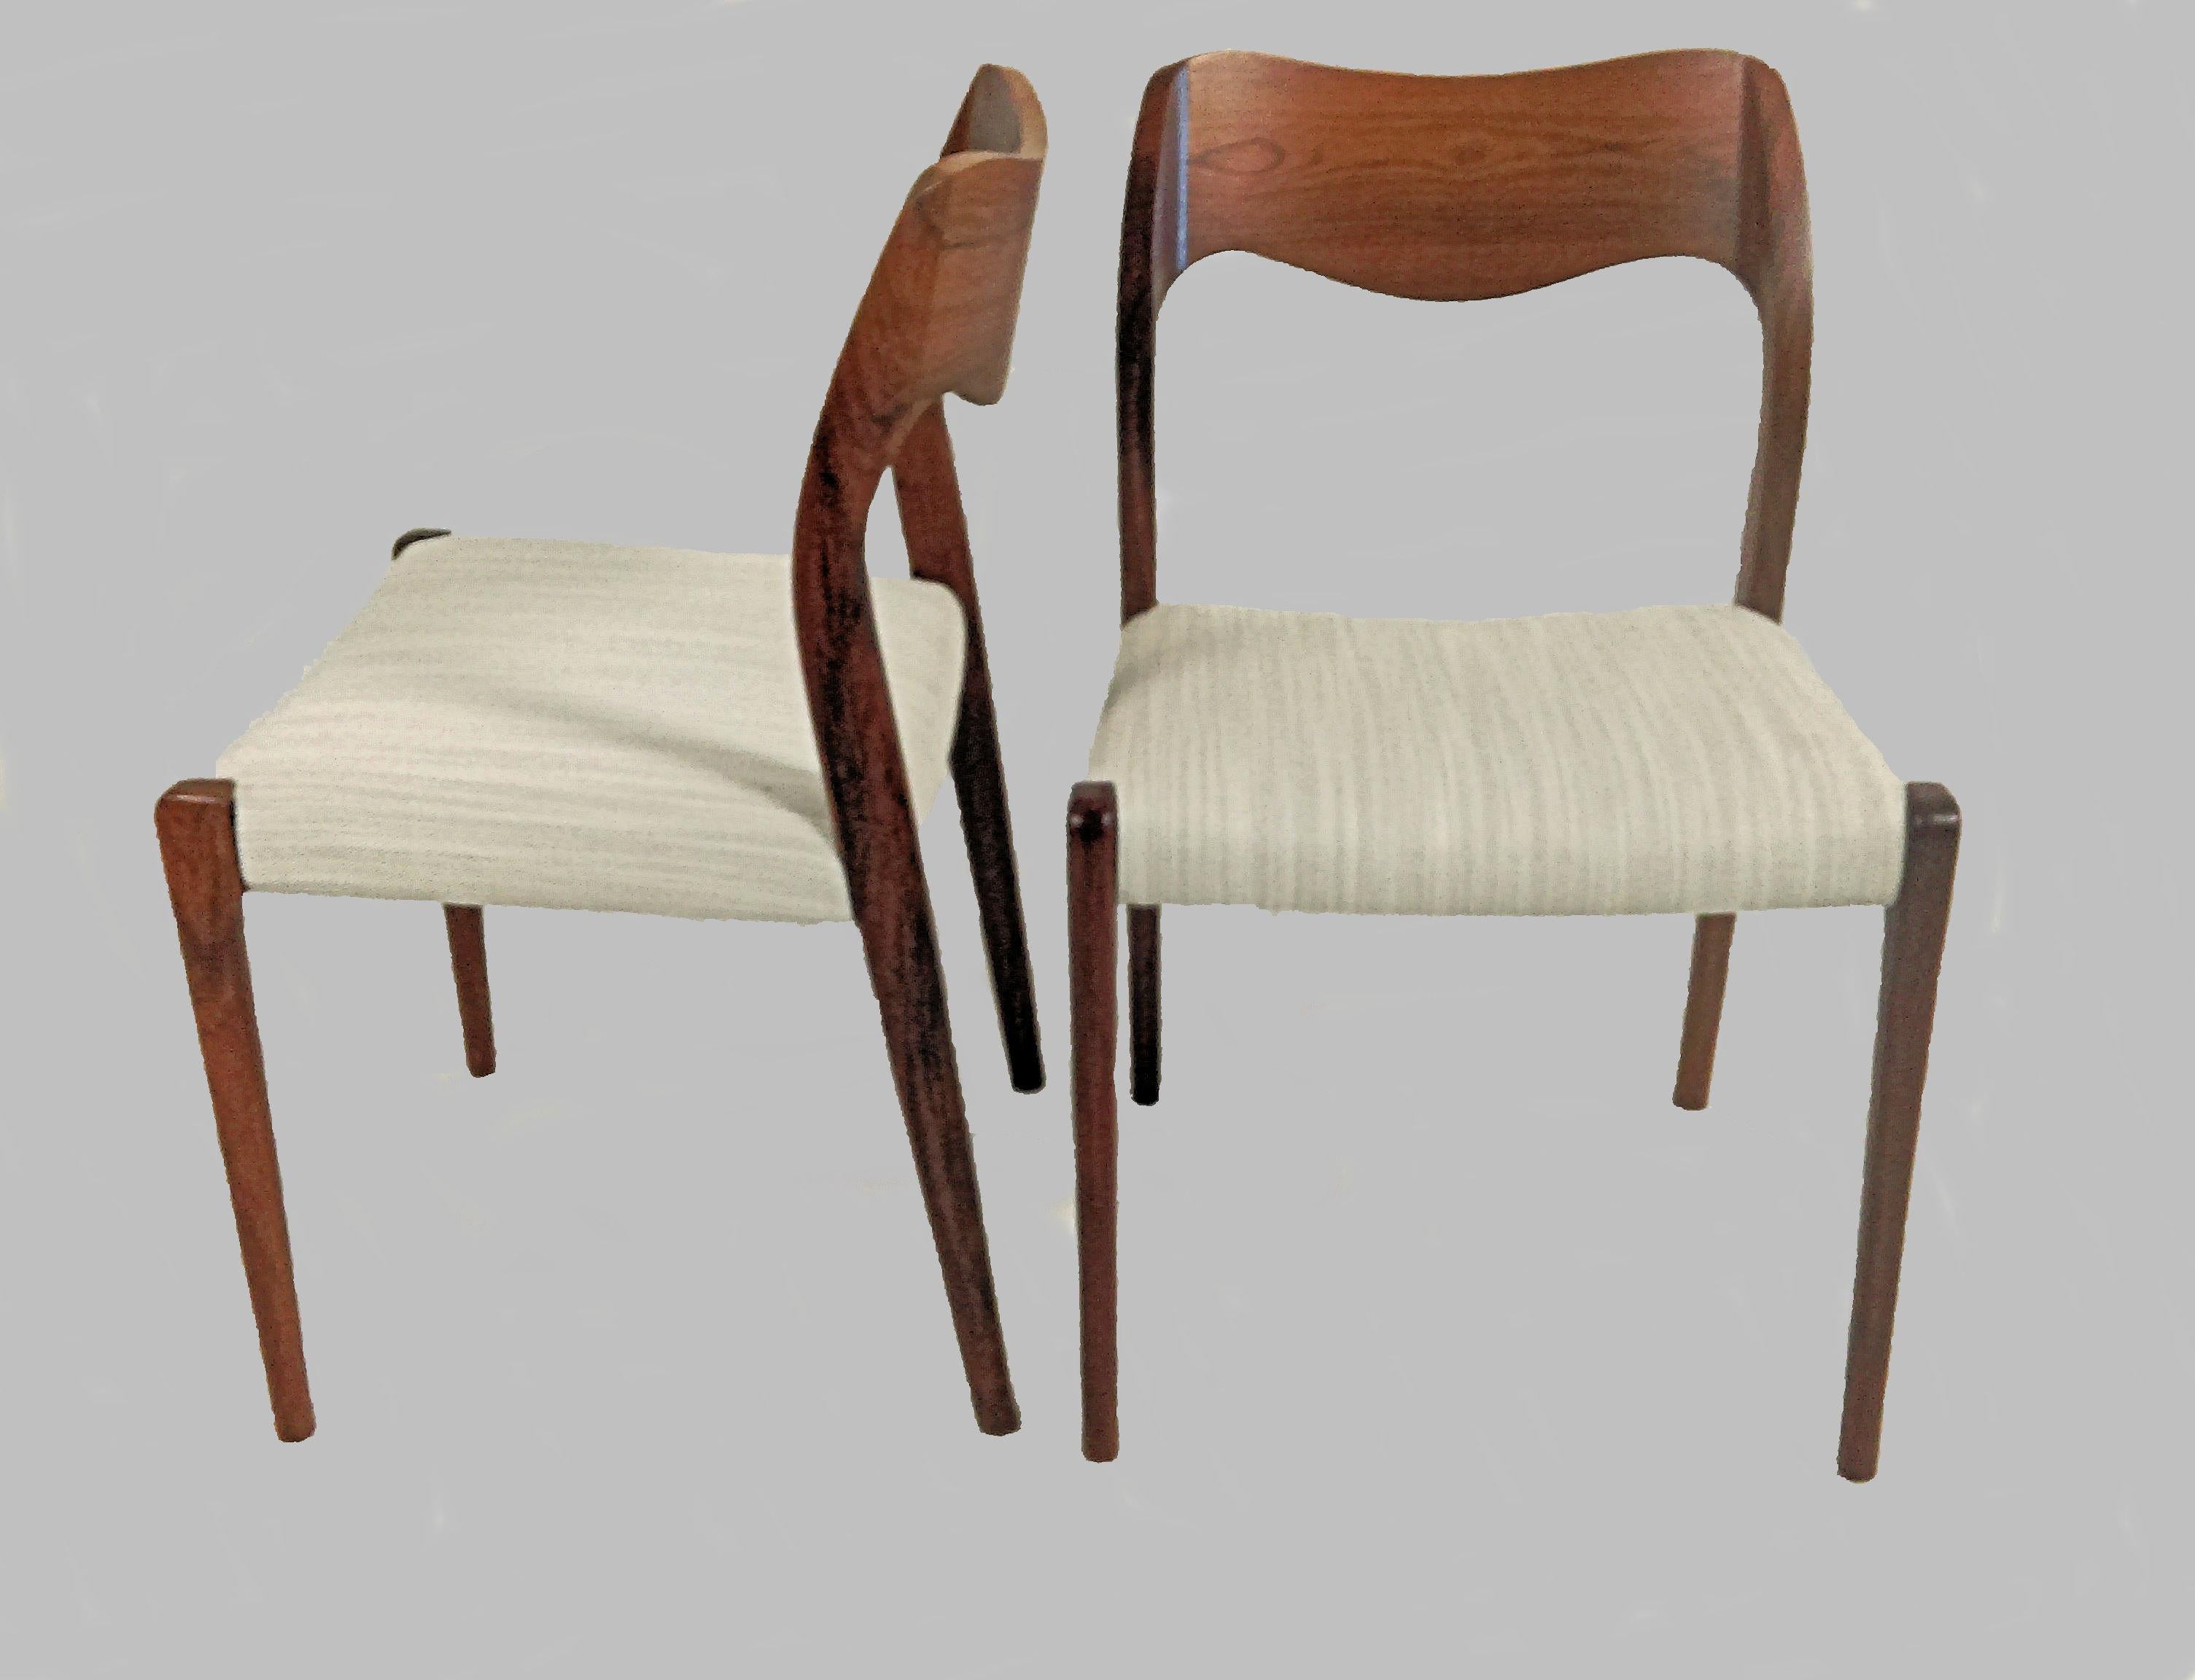 Set of six model 71 rosewood dining chairs designed by Niels Otto Møller in 1951.

The chairs feature a solid frame and backrest in rosewood designed with straight lined legs and an elegant organic shaped backrest with the soft lines and curves that